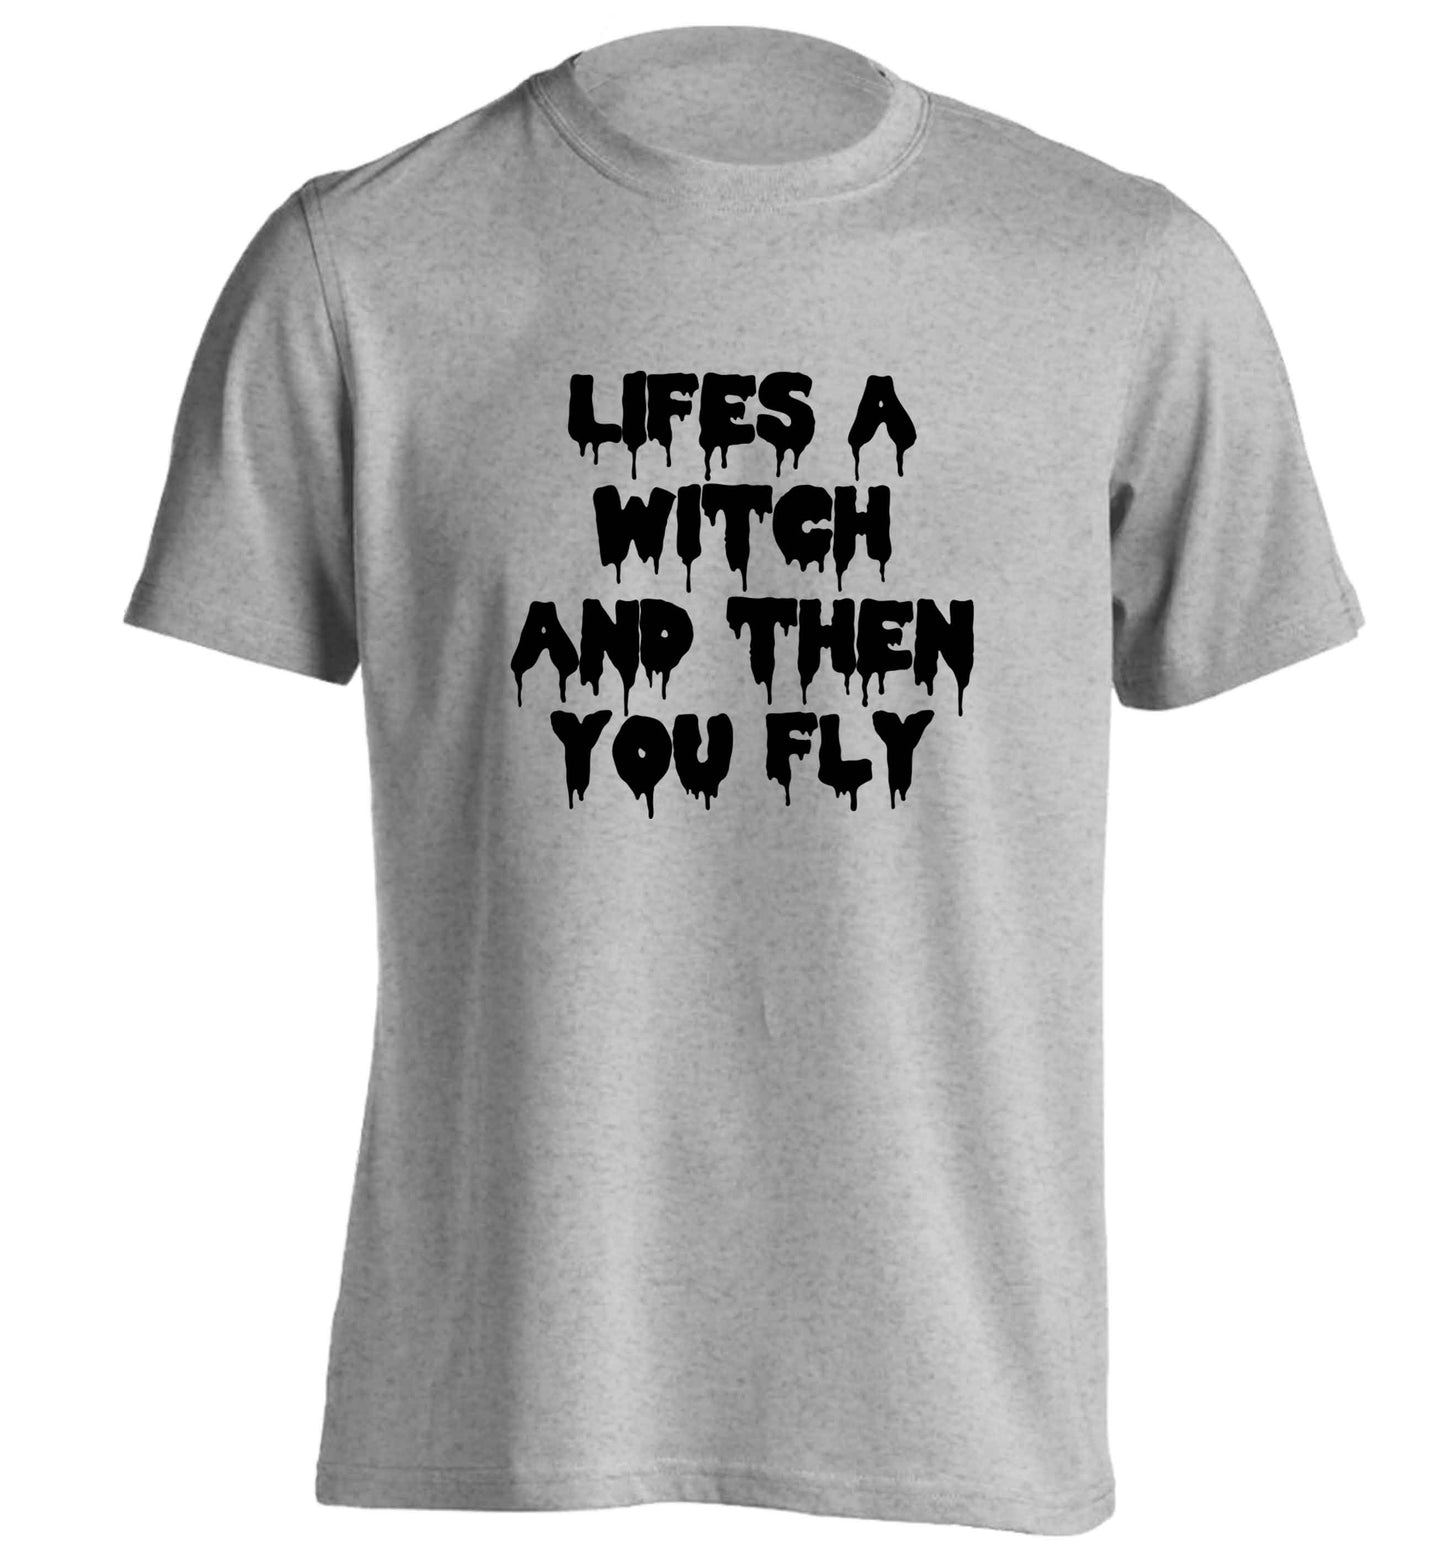 Life's a witch and then you fly adults unisex grey Tshirt 2XL